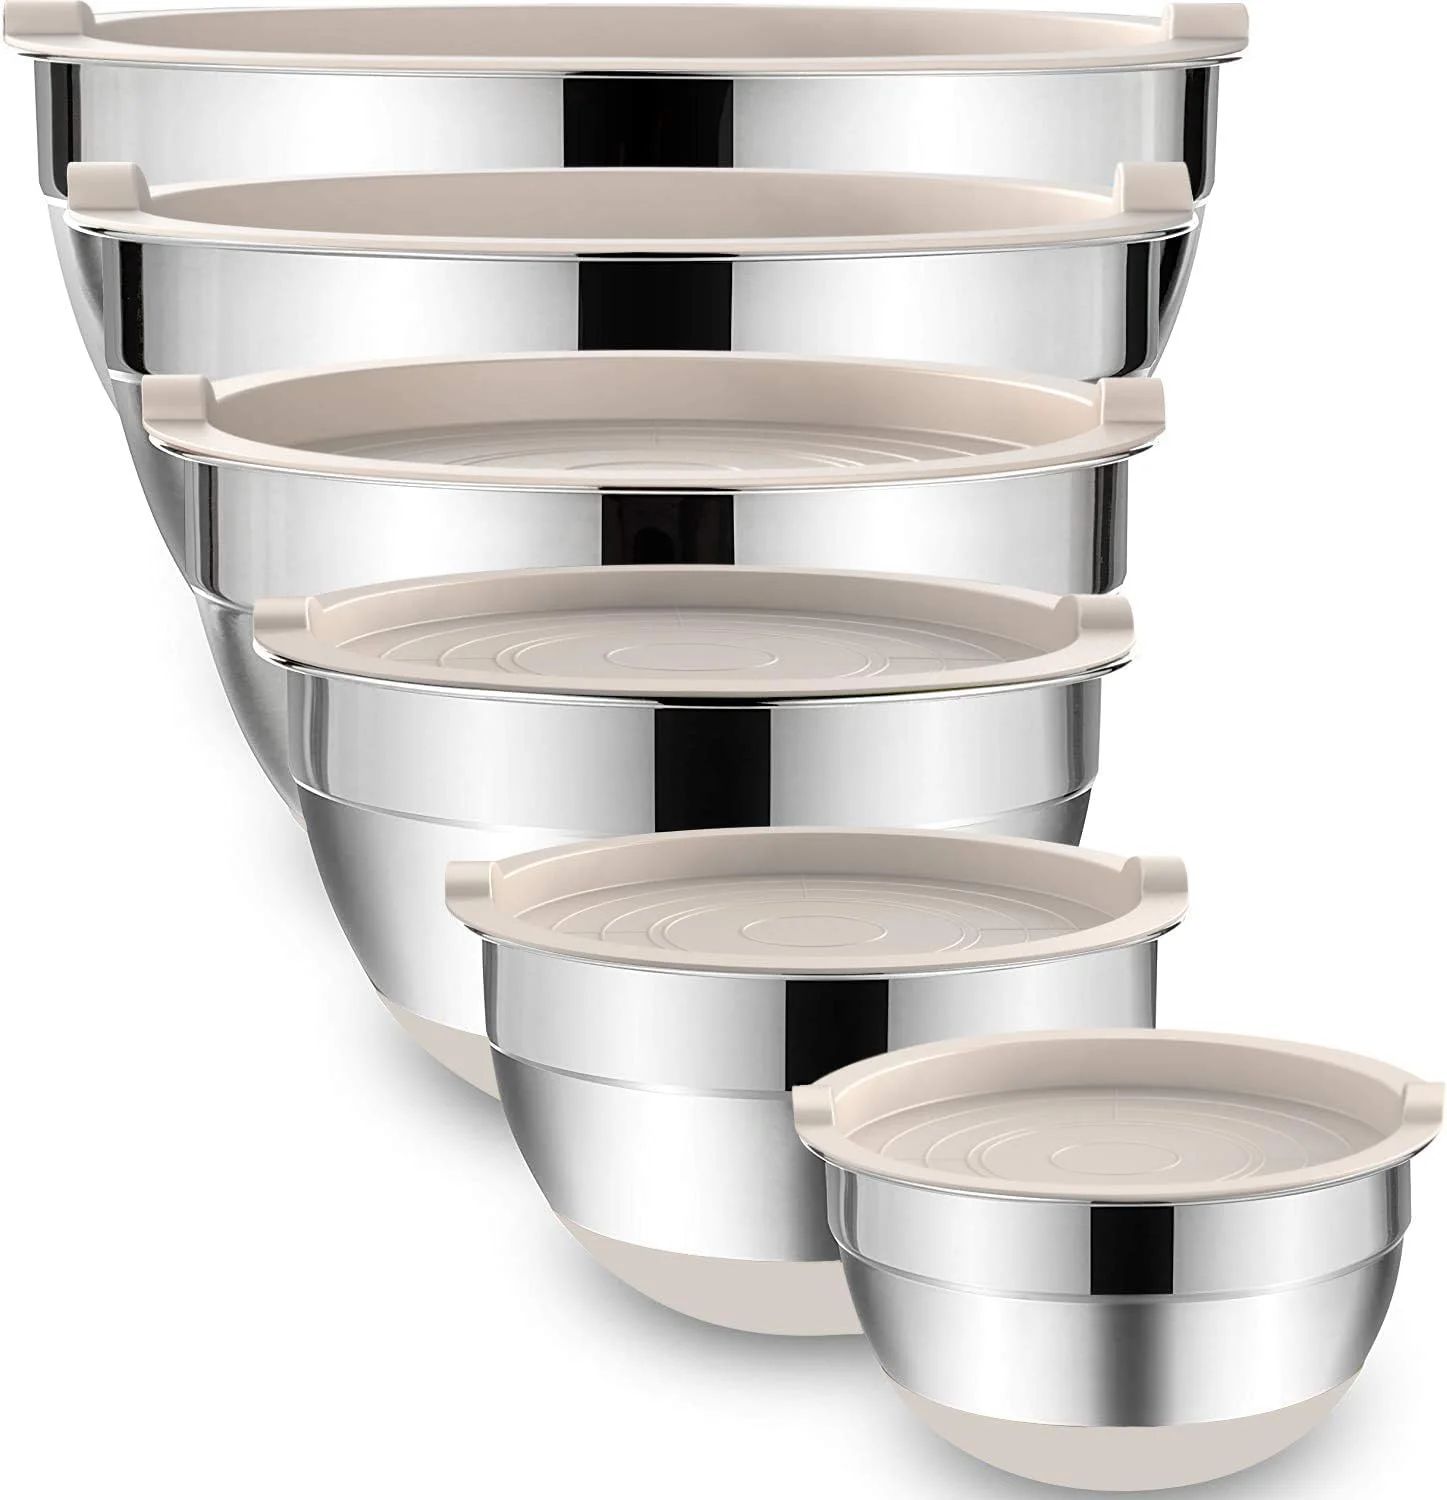 Mixing Bowls with Airtight Lids, 6 piece Stainless Steel Metal Nesting Storage Bowls, Non-Slip Bo... | Walmart (US)